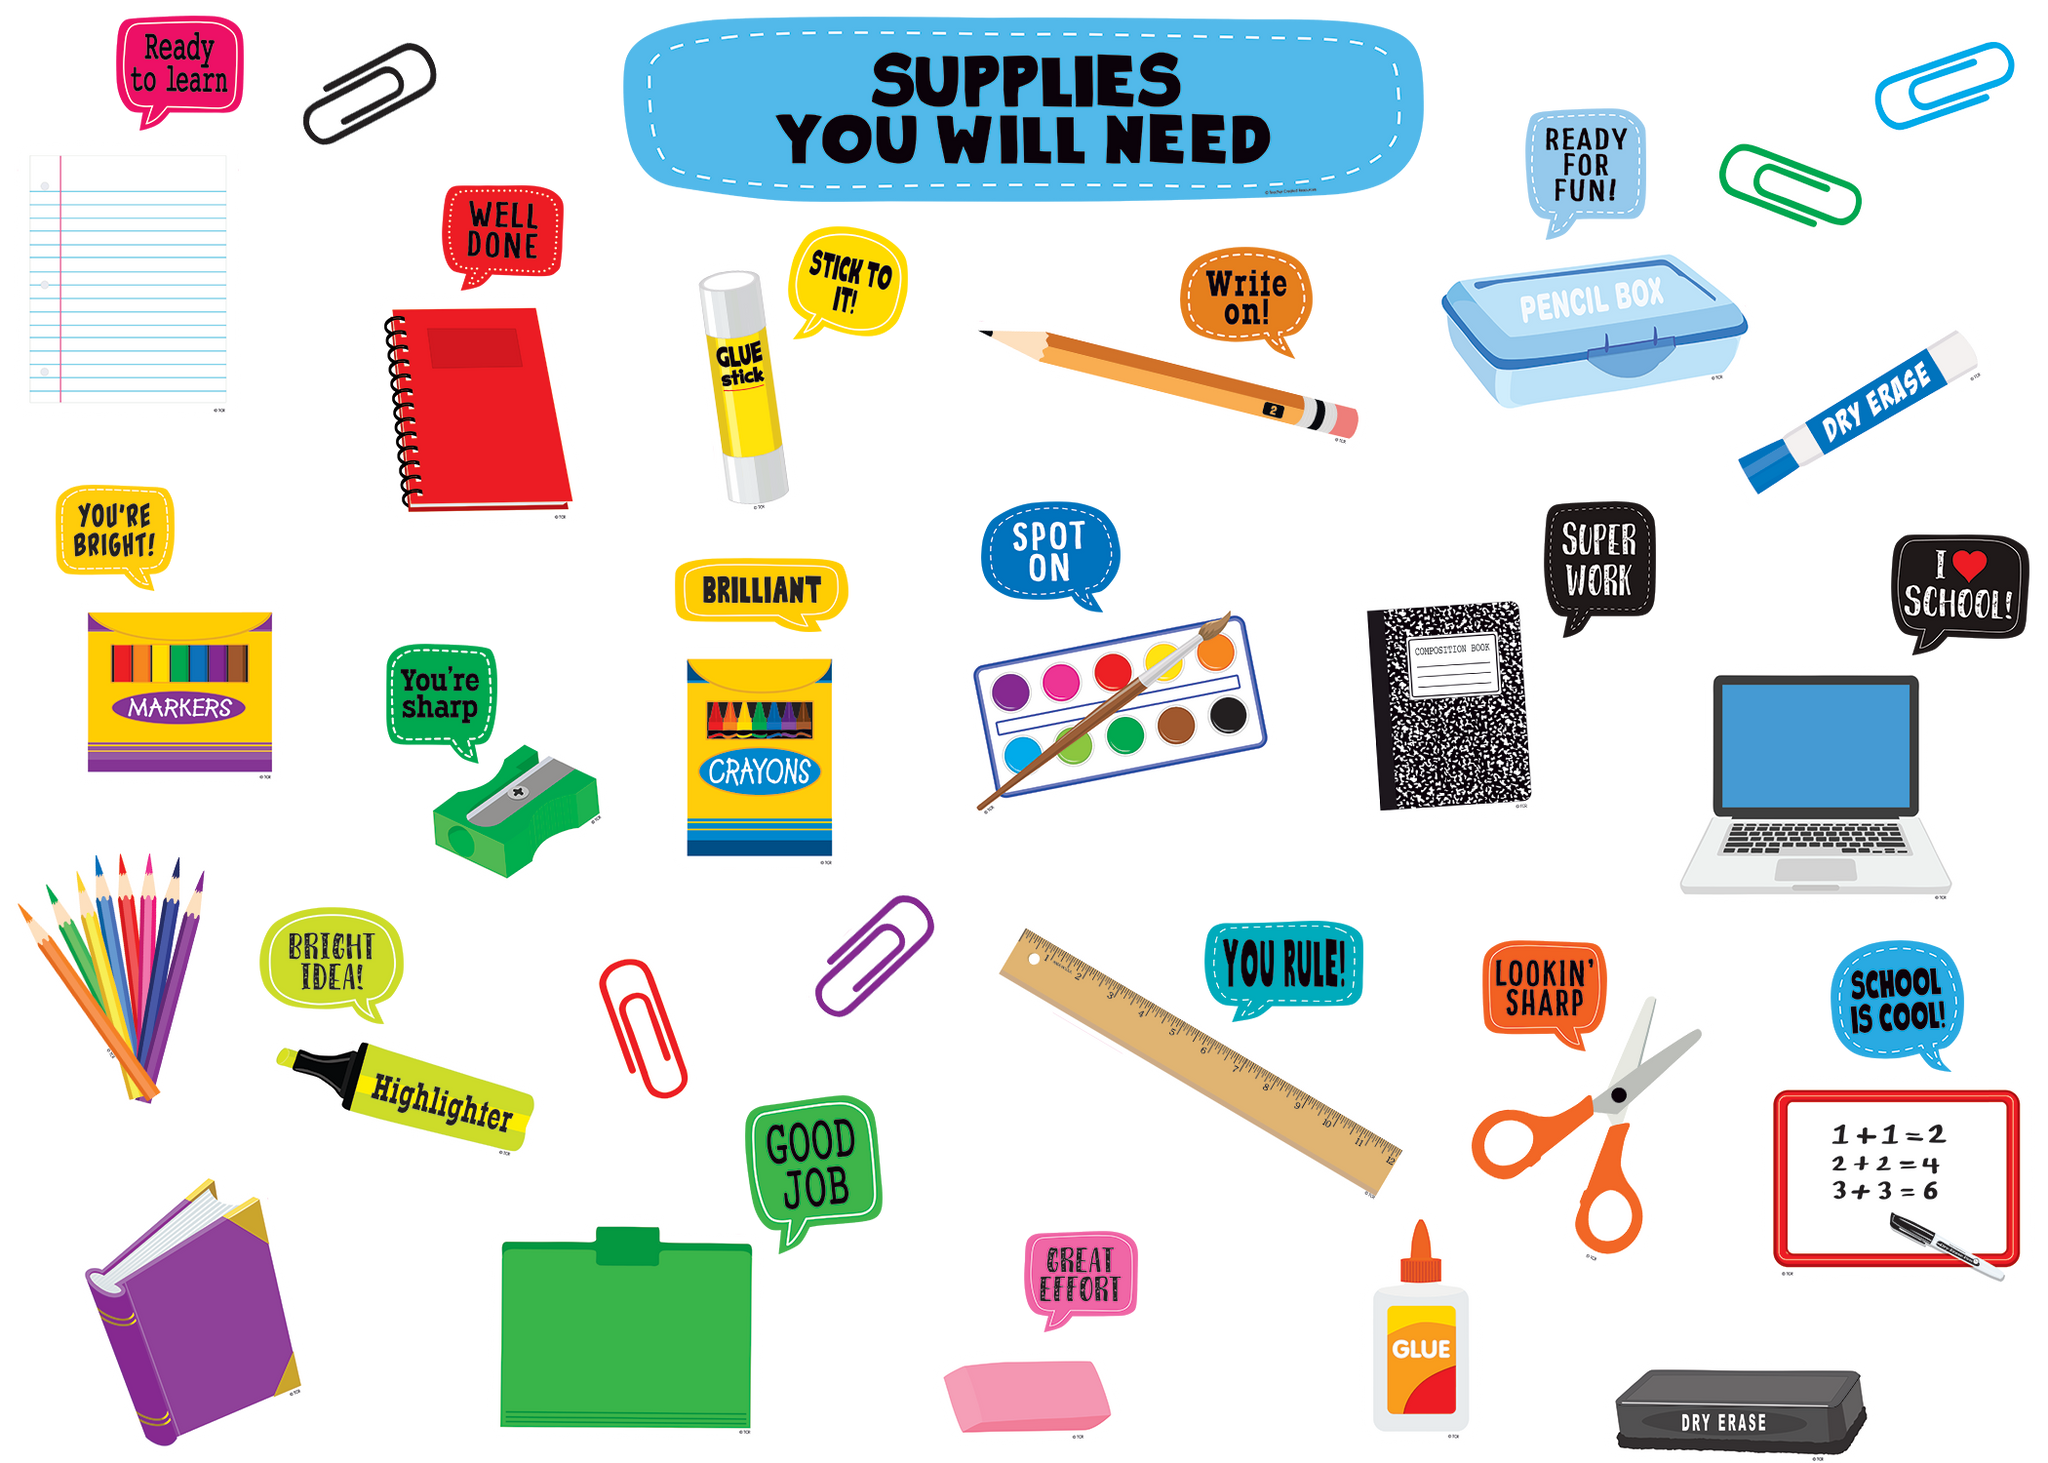 Features: 1 title piece spelling out “Supplies You Will Need”, 22 supply pieces, 17 encouragement callouts, 5 paper-clip accents, Bulletin Board Guide with suggestions and activities